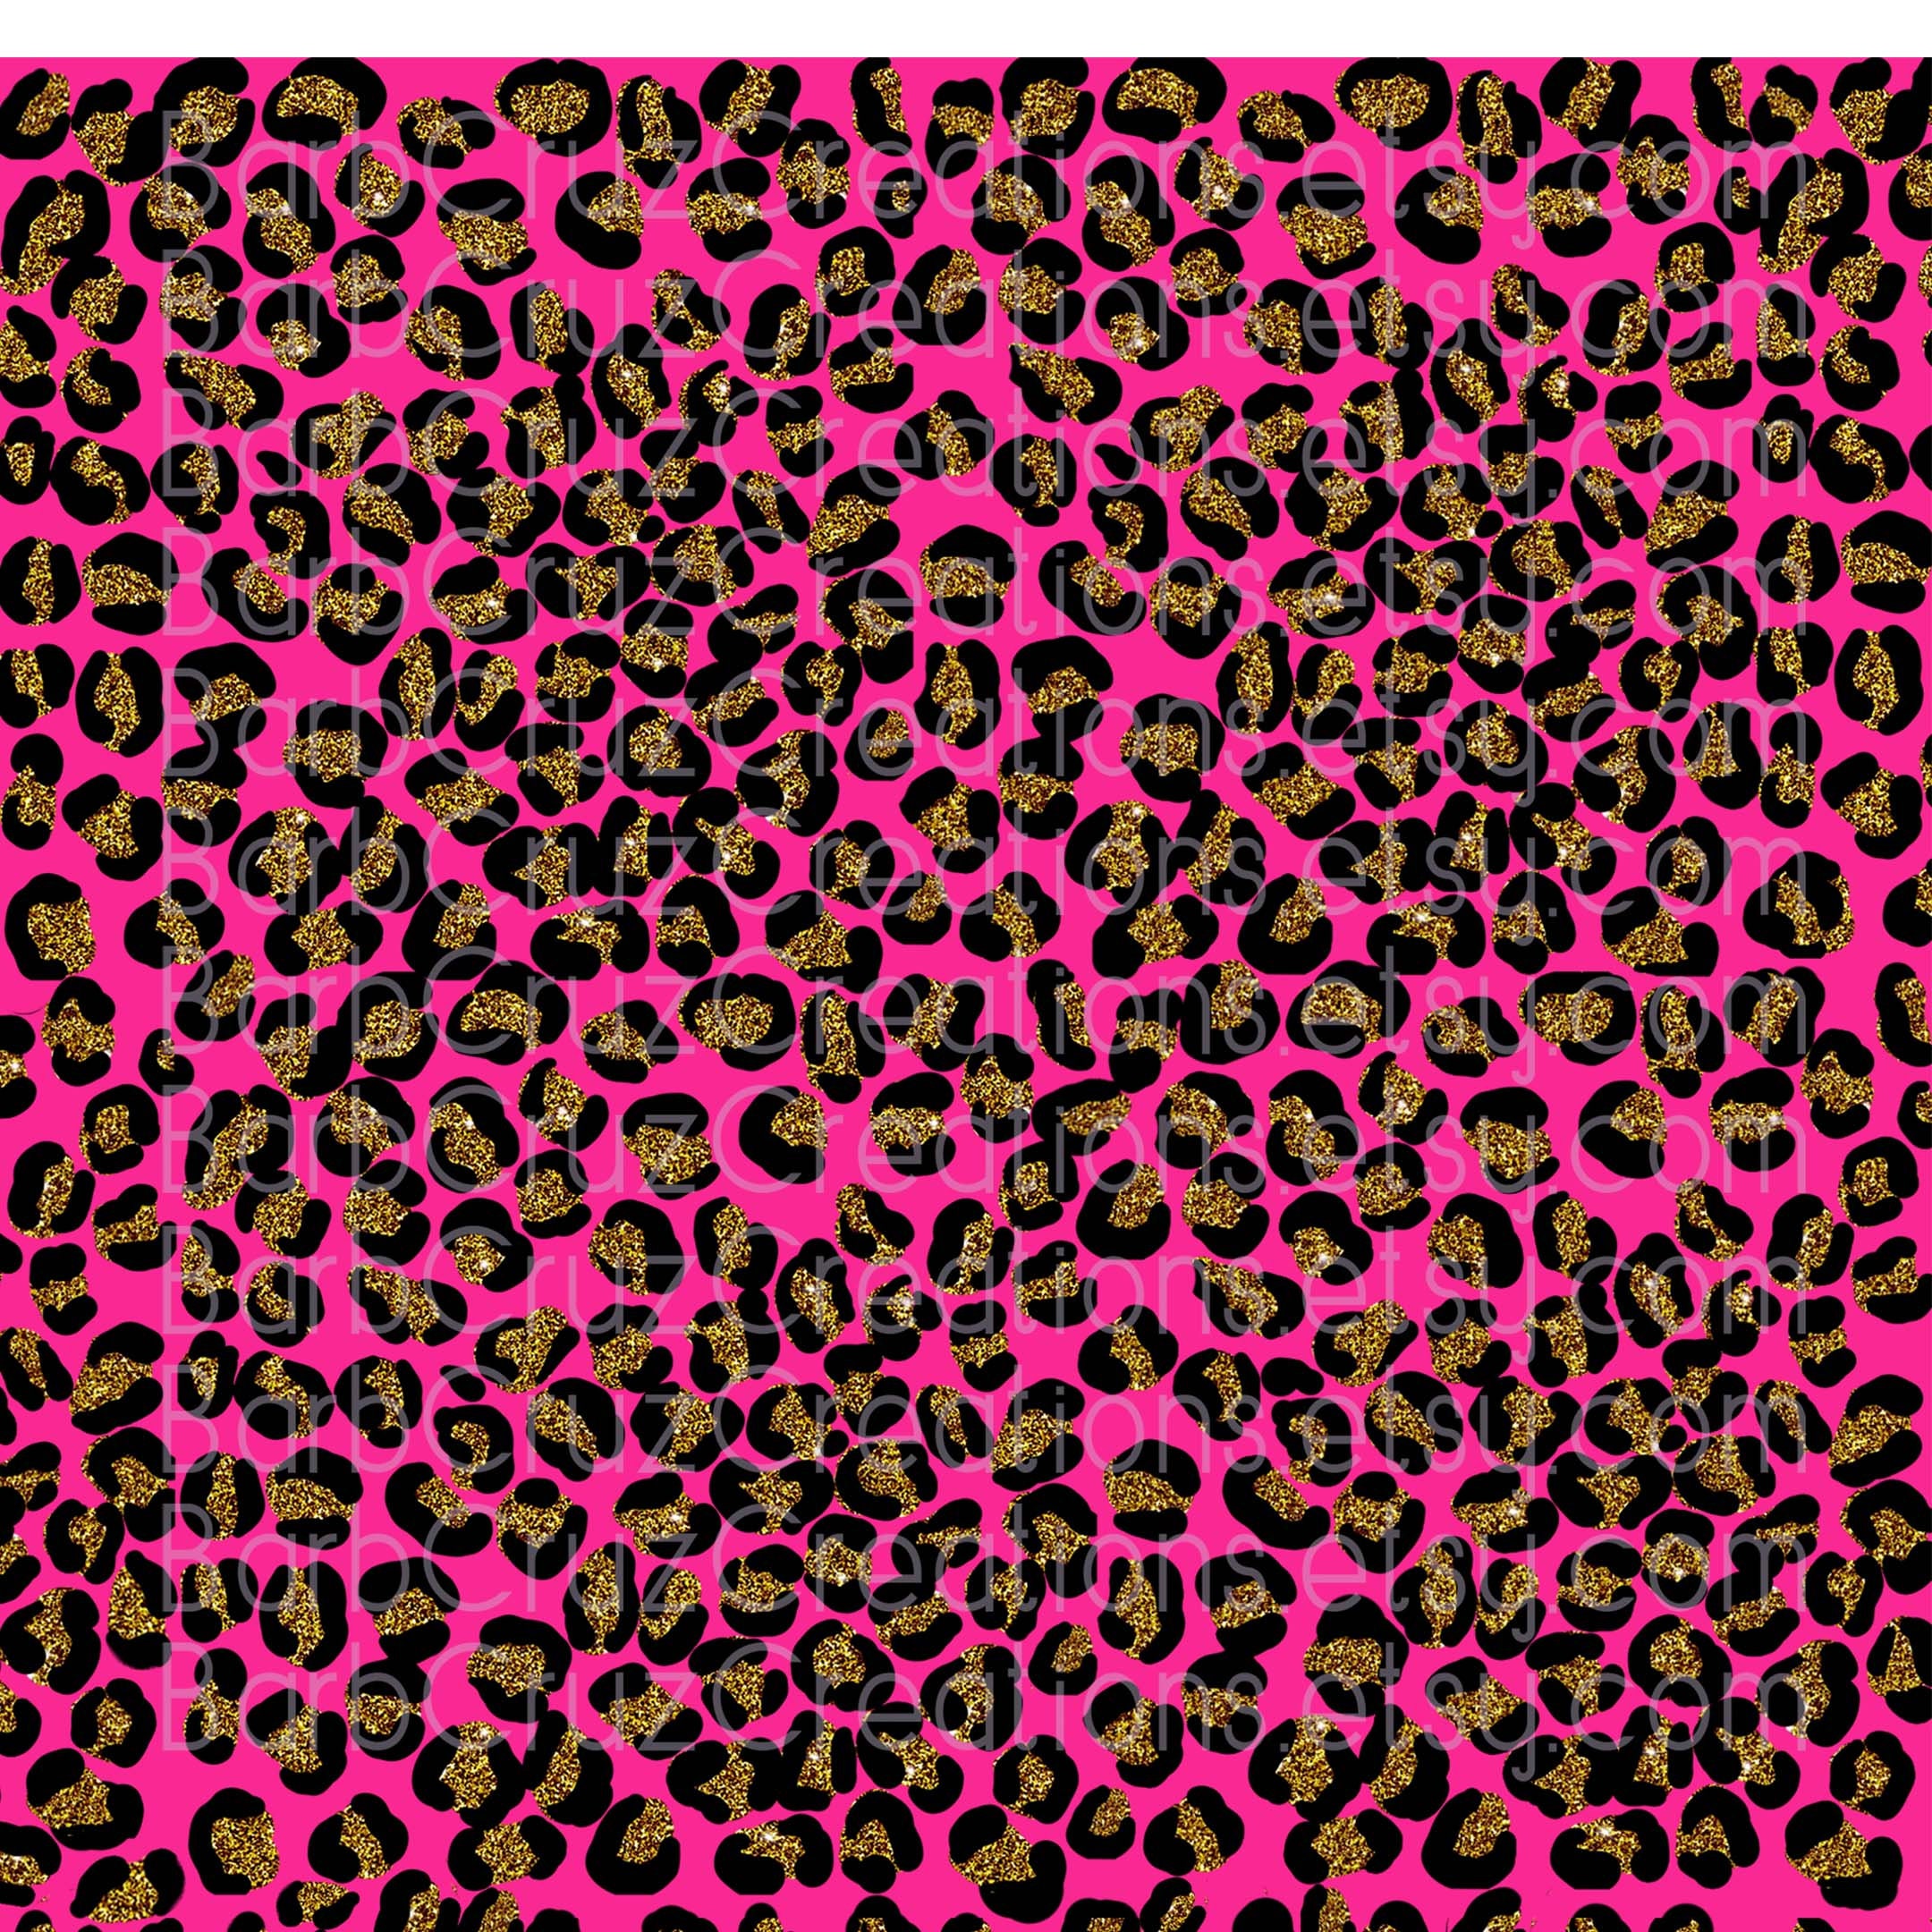 Glitter Leopard Print Backgrounds Pink Red Yellow White - Etsy